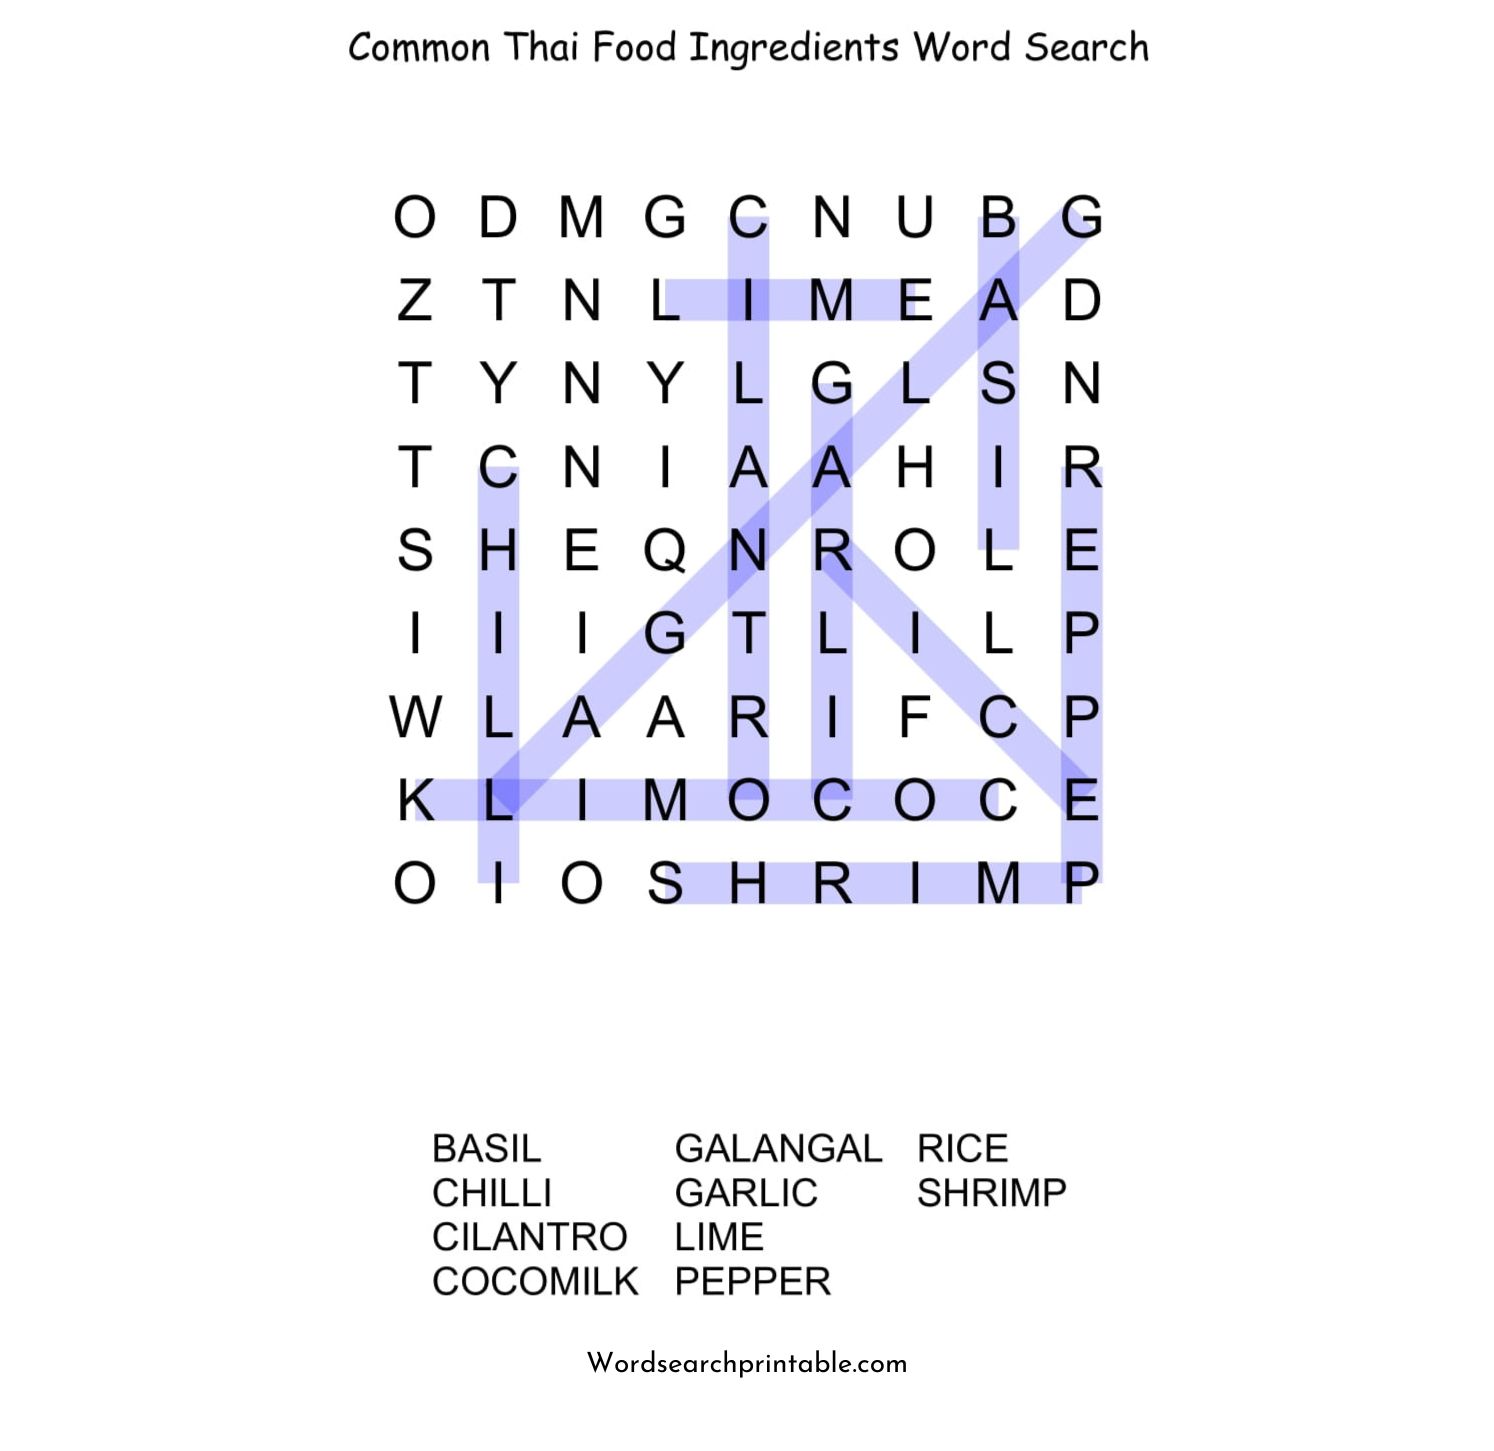 common thai food ingredients word search puzzle solution